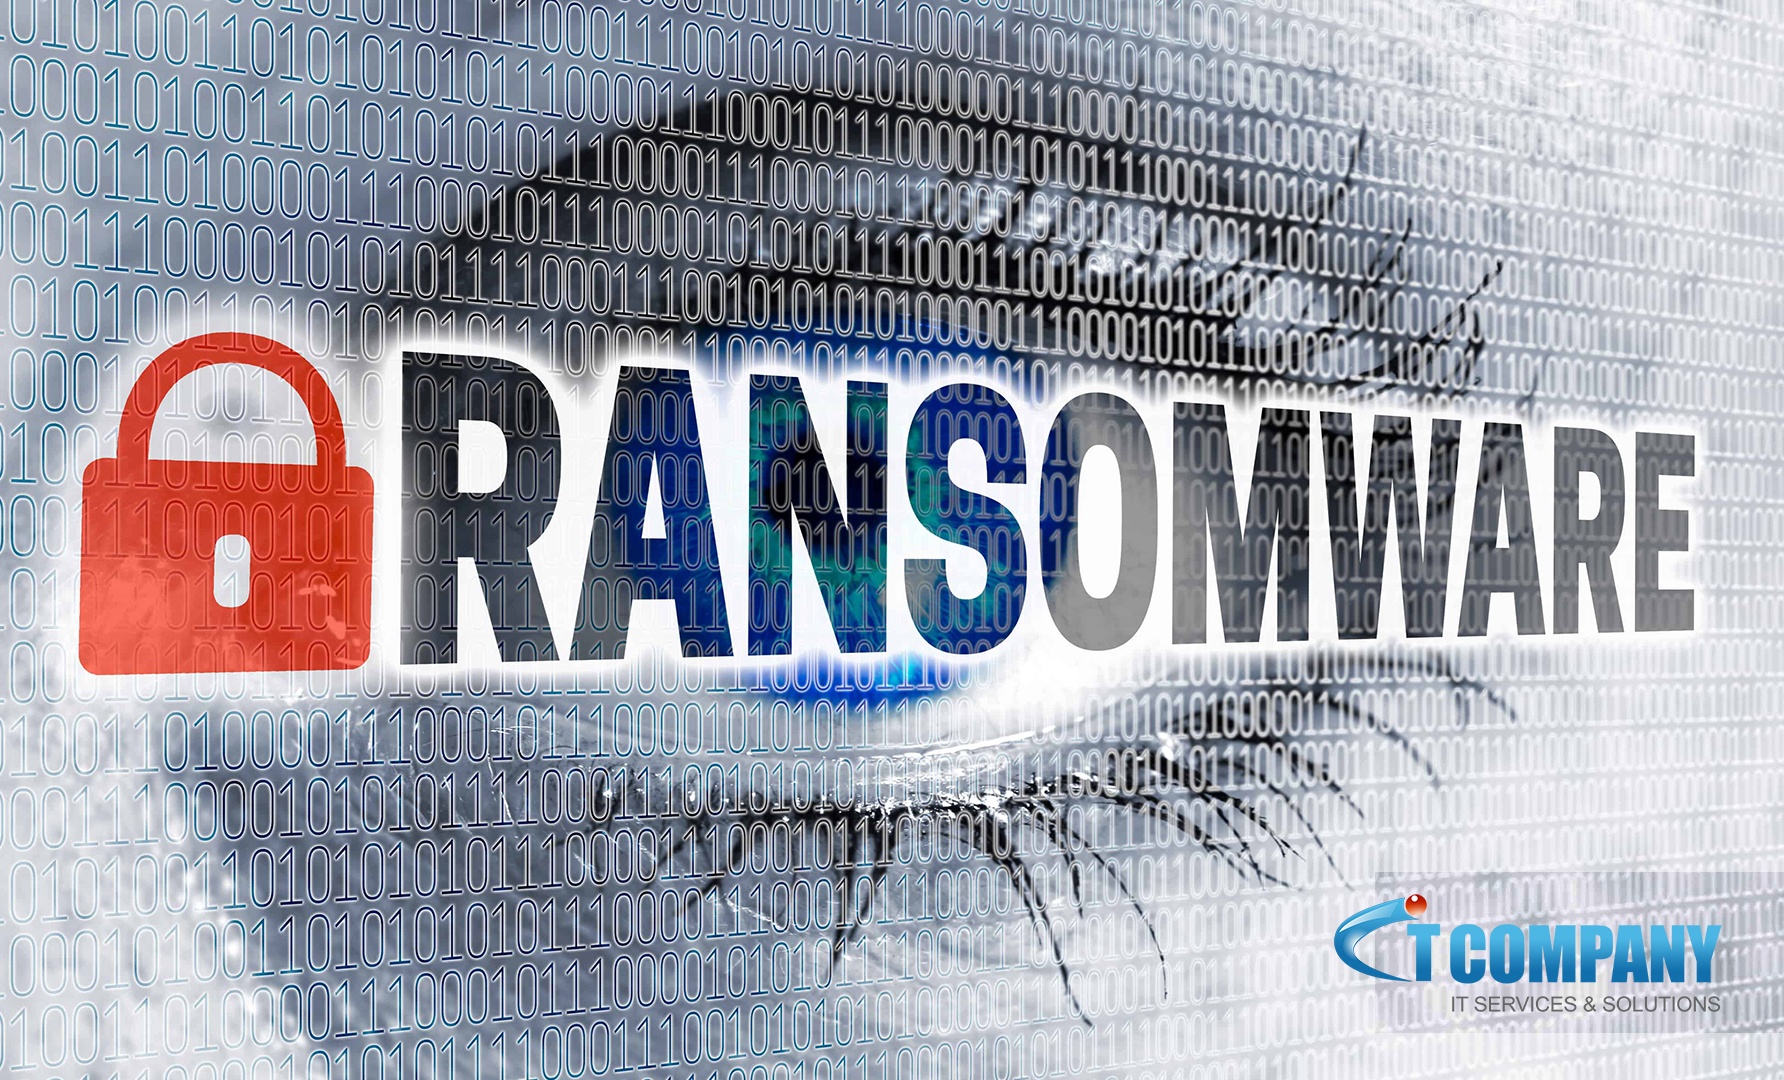 Ransomware is posing a greater danger to organizations than ever before